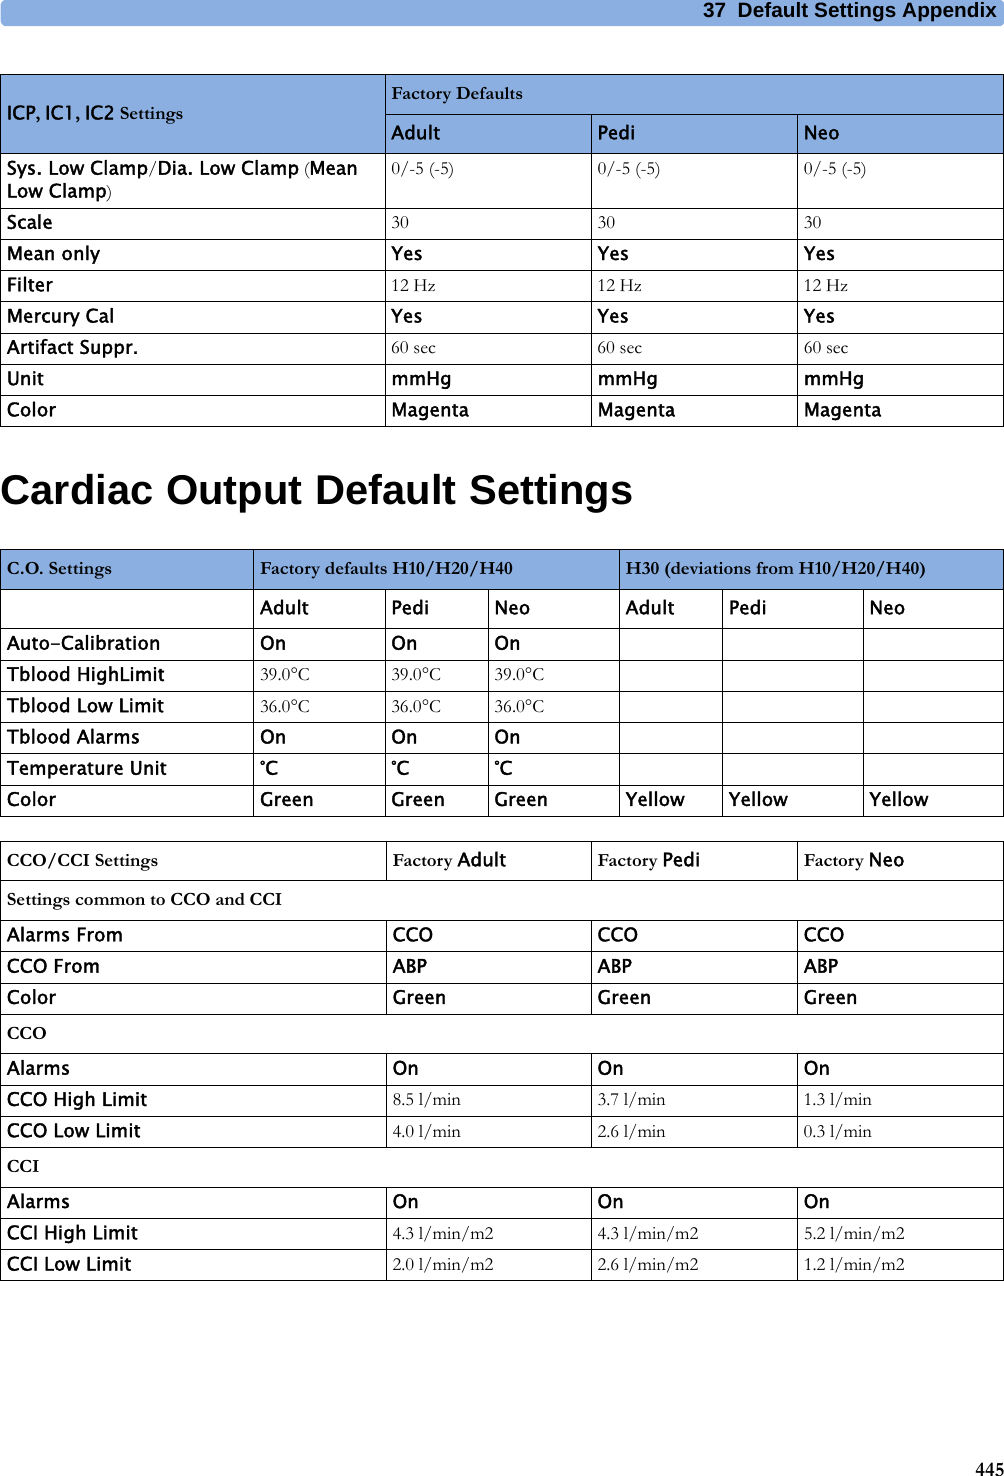 37 Default Settings Appendix445Cardiac Output Default SettingsSys. Low Clamp/Dia. Low Clamp (Mean Low Clamp)0/-5 (-5) 0/-5 (-5) 0/-5 (-5)Scale 30 30 30Mean only Yes Yes YesFilter 12 Hz 12 Hz 12 HzMercury Cal Yes Yes YesArtifact Suppr. 60 sec 60 sec 60 secUnit mmHg mmHg mmHgColor Magenta Magenta MagentaICP, IC1, IC2 SettingsFactory DefaultsAdult Pedi NeoC.O. Settings Factory defaults H10/H20/H40 H30 (deviations from H10/H20/H40)Adult Pedi Neo Adult Pedi NeoAuto-Calibration On On OnTblood HighLimit 39.0°C 39.0°C 39.0°CTblood Low Limit 36.0°C 36.0°C 36.0°CTblood Alarms On On OnTemperature Unit °C °C °CColor Green Green Green Yellow Yellow YellowCCO/CCI Settings Factory Adult Factory Pedi Factory NeoSettings common to CCO and CCIAlarms From CCO CCO CCOCCO From ABP ABP ABPColor Green Green GreenCCOAlarms On On OnCCO High Limit 8.5 l/min 3.7 l/min 1.3 l/minCCO Low Limit 4.0 l/min 2.6 l/min 0.3 l/minCCIAlarms On On OnCCI High Limit 4.3 l/min/m2 4.3 l/min/m2 5.2 l/min/m2CCI Low Limit 2.0 l/min/m2 2.6 l/min/m2 1.2 l/min/m2